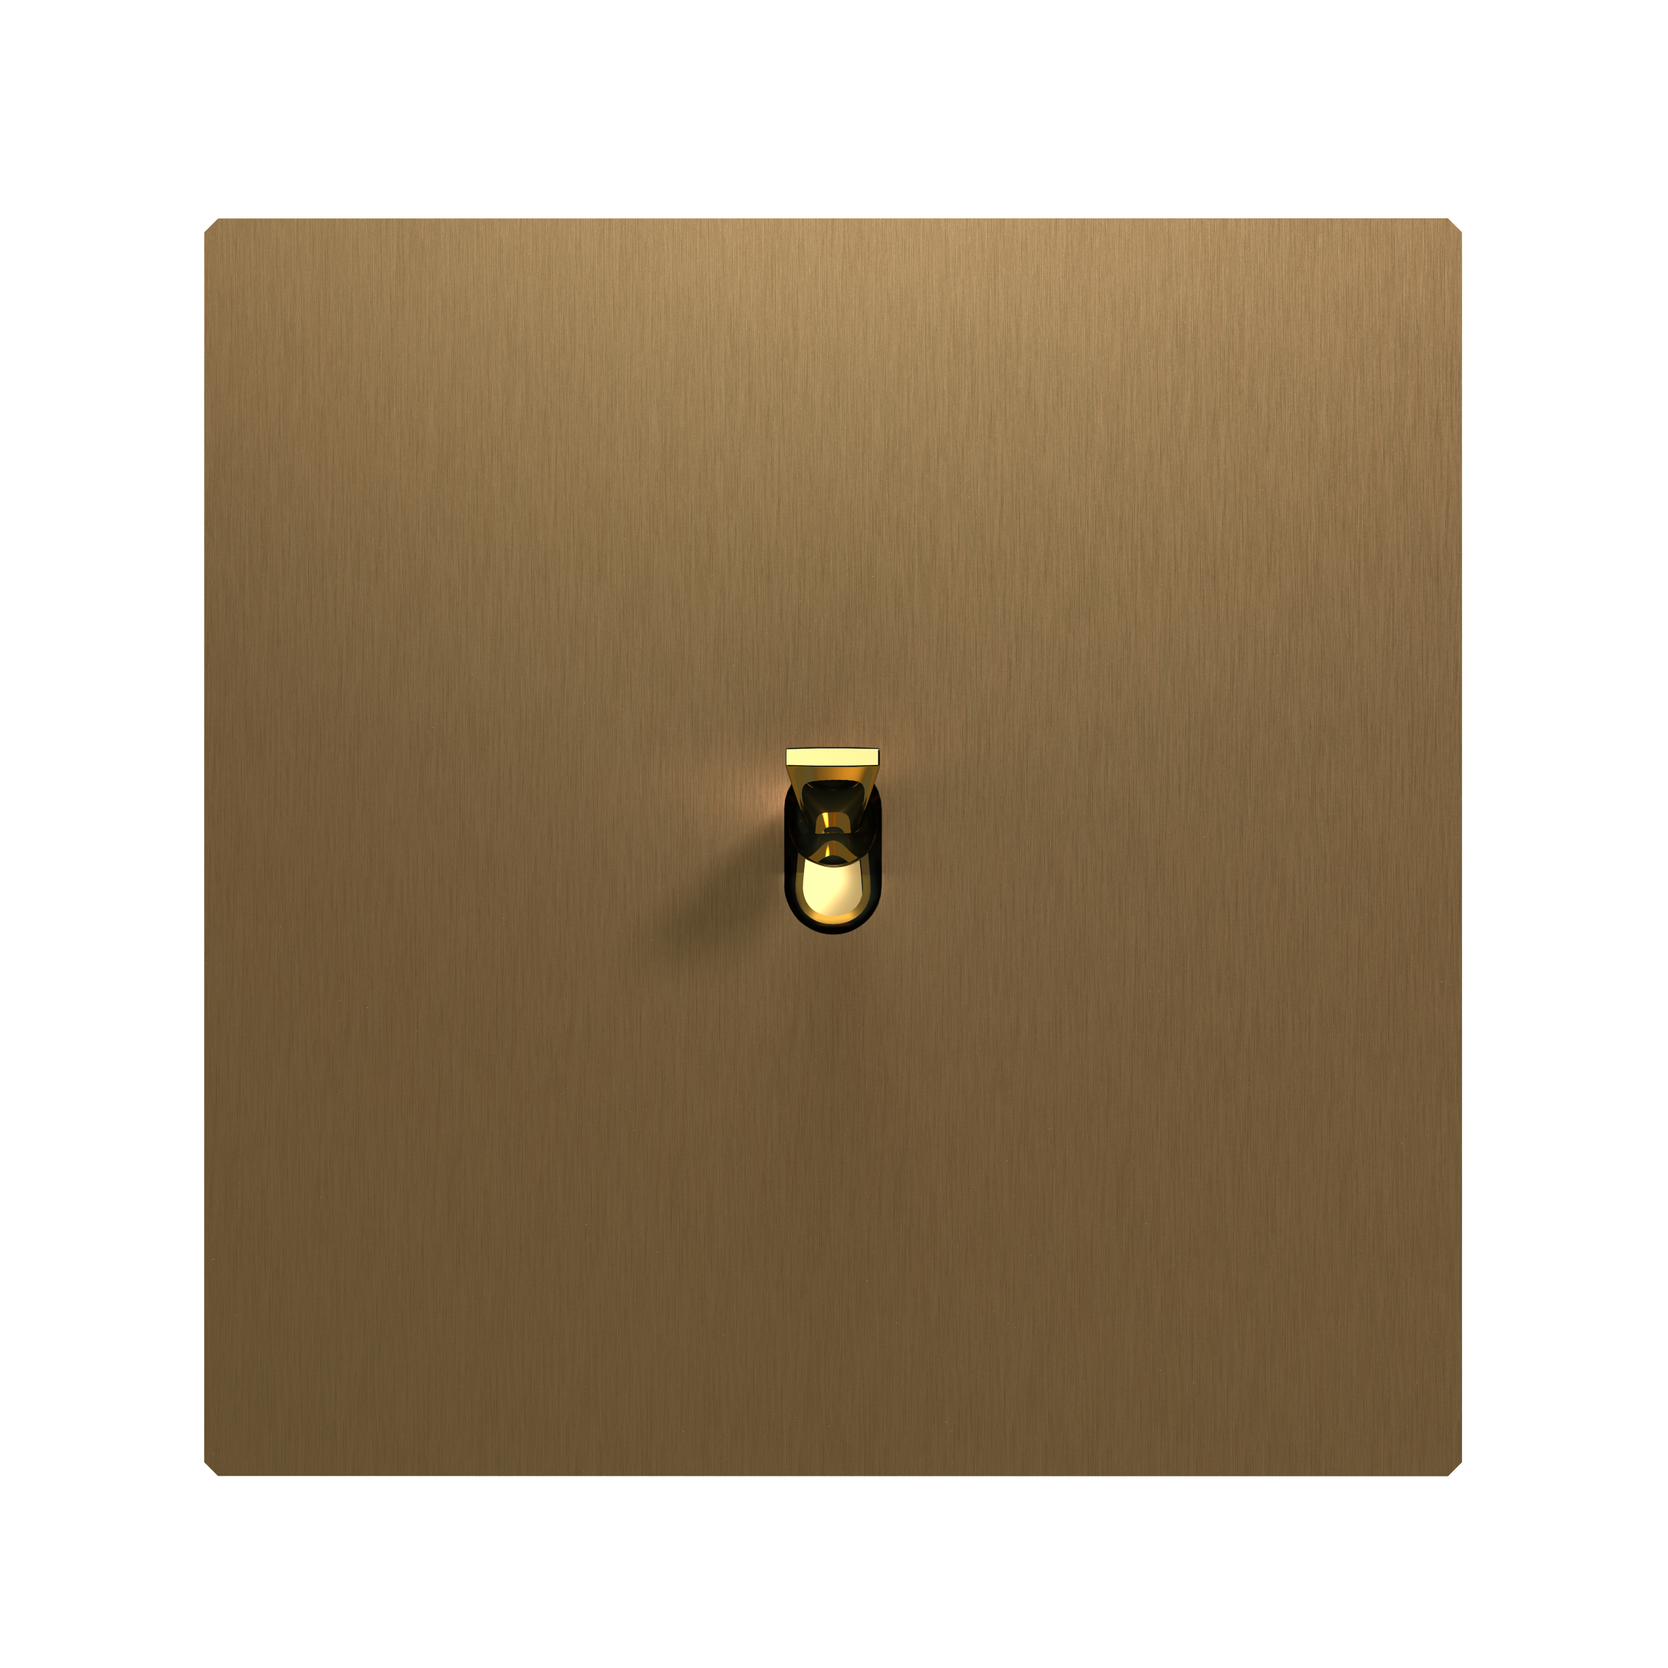 5.1 Switch in Bronze Brass with a Bright Golden Knob